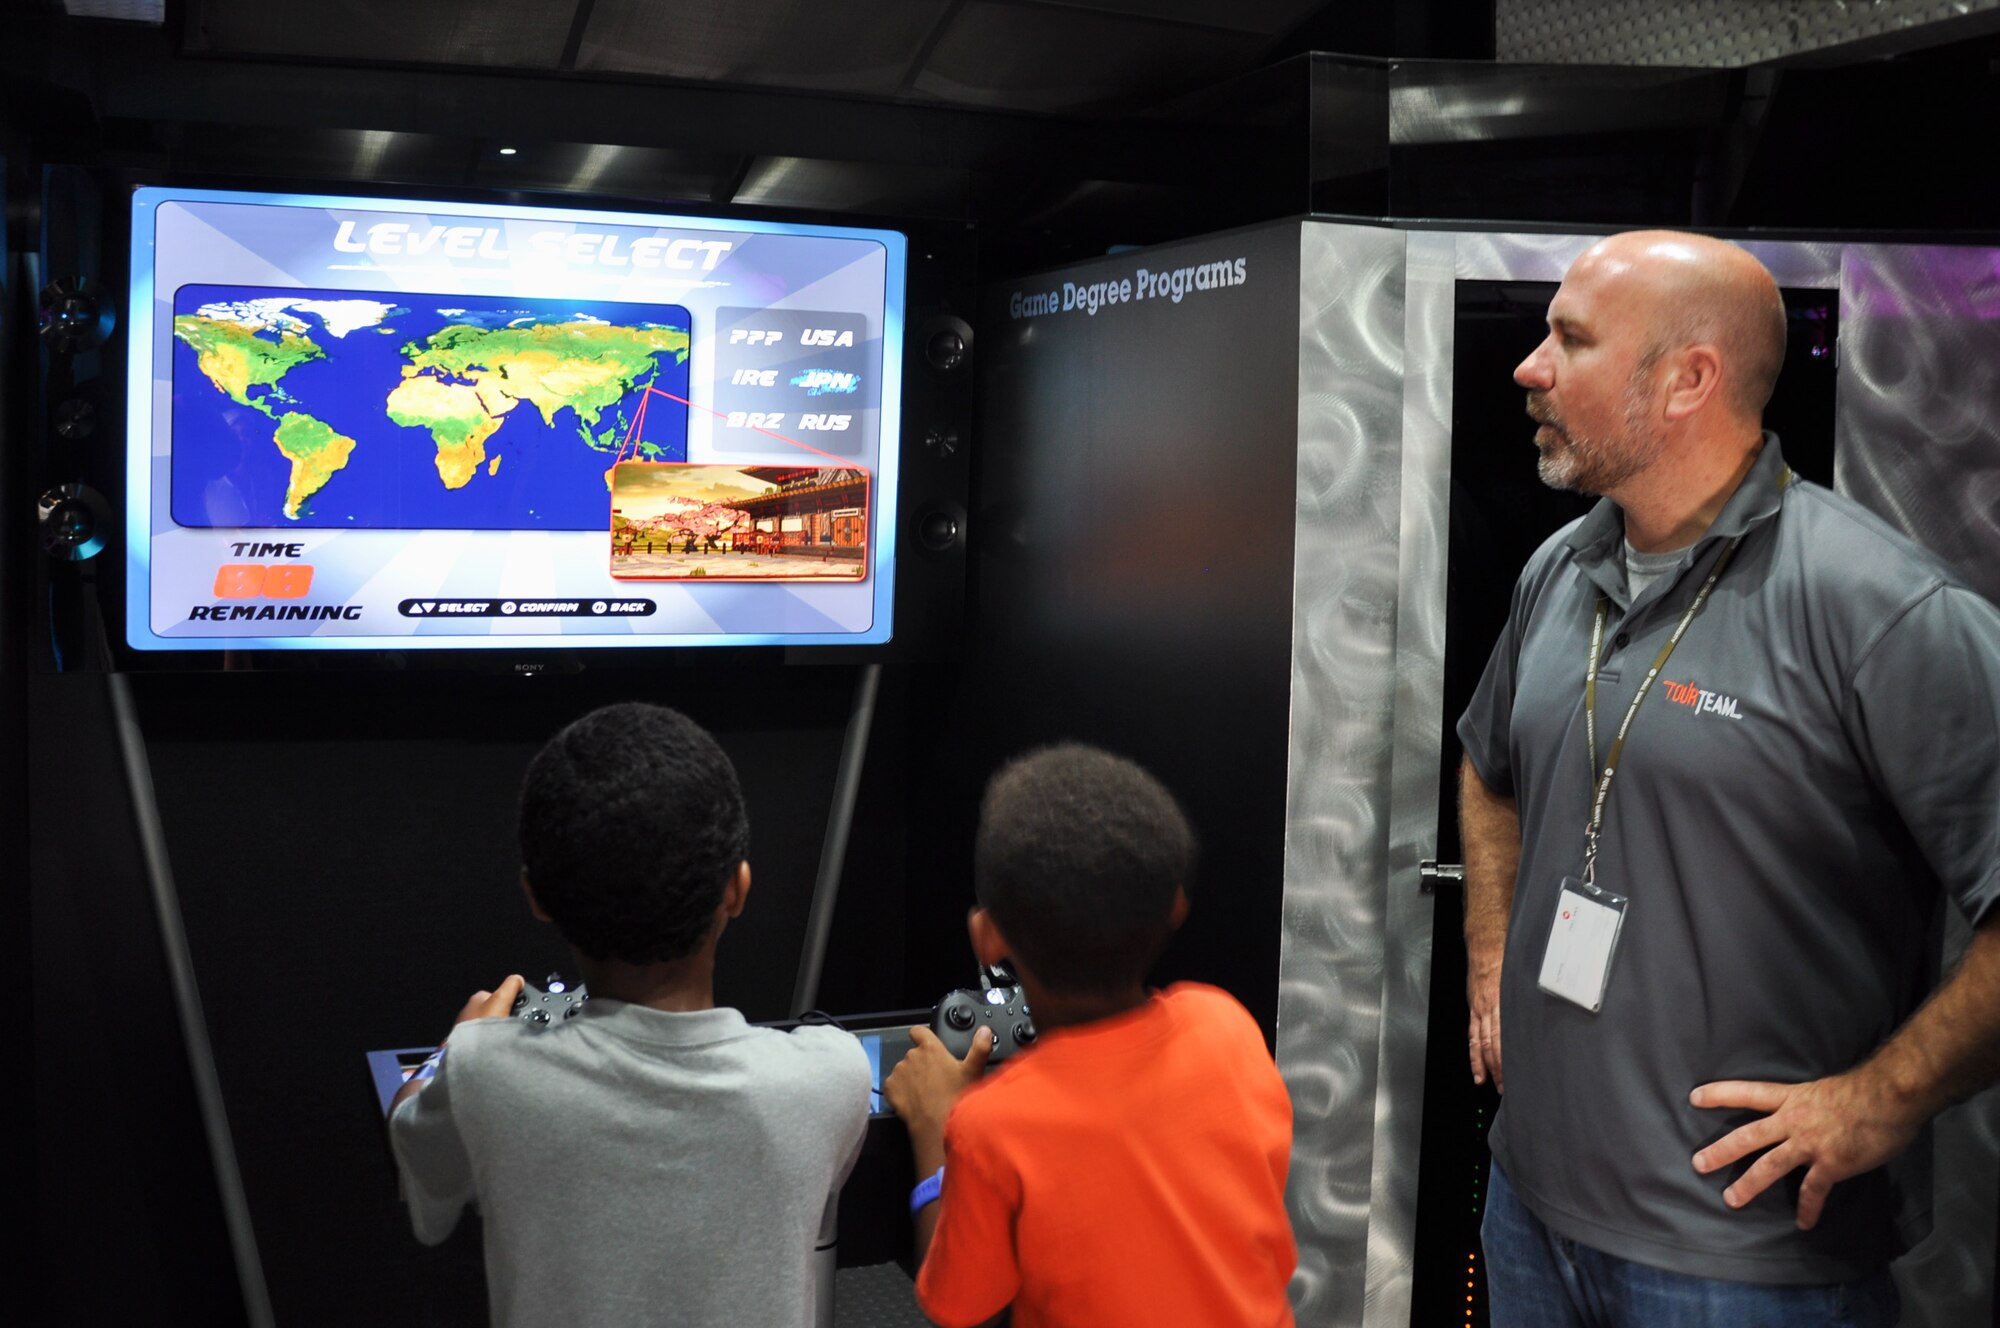 Joel Pickering teaches children about the importance of math as they play a video game created by student computer programmers from Full Sail University during the 45th Space Wing’s All SySTEMs Go event June 11, 2016, at the Youth Center/Shark Center at Patrick Air Force Base, Fla. The event was designed to teach children of all ages about science, technology, engineering and math. (U.S. Air Force Photo/Tech. Sgt. Erin Smith/Released)